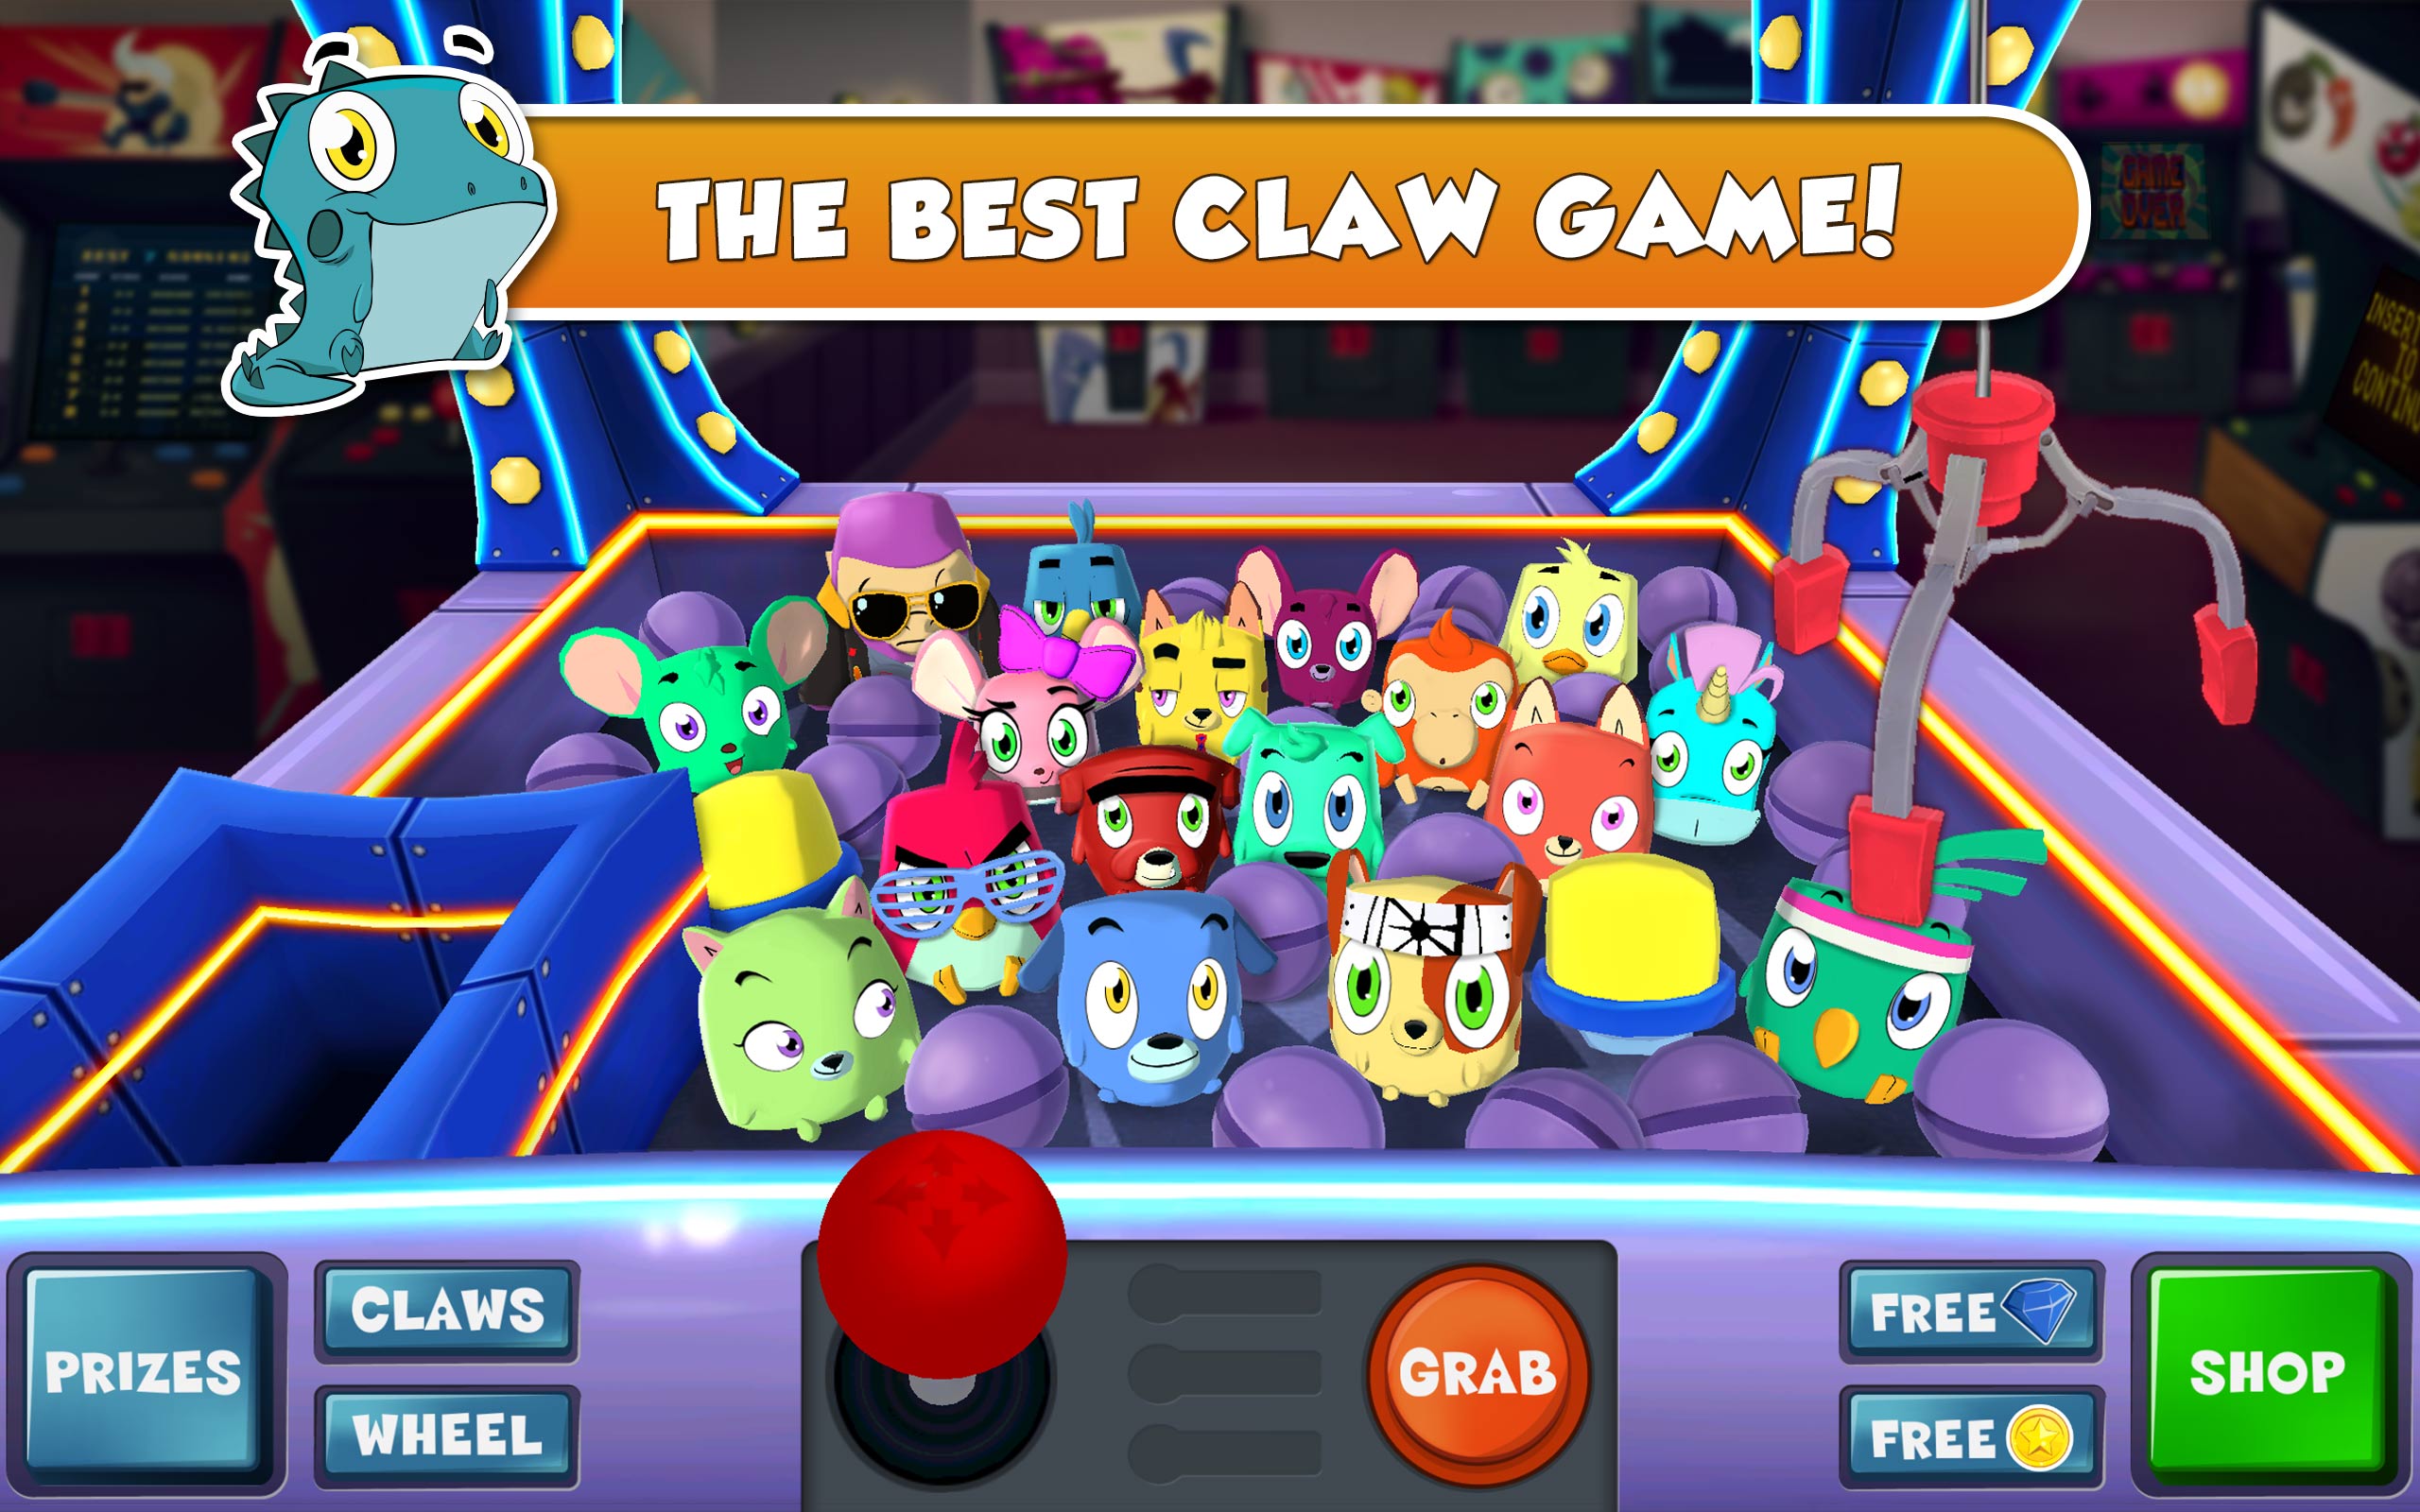 Game prize. Claw игра. Wheel Claws. Claw game Machine icon.